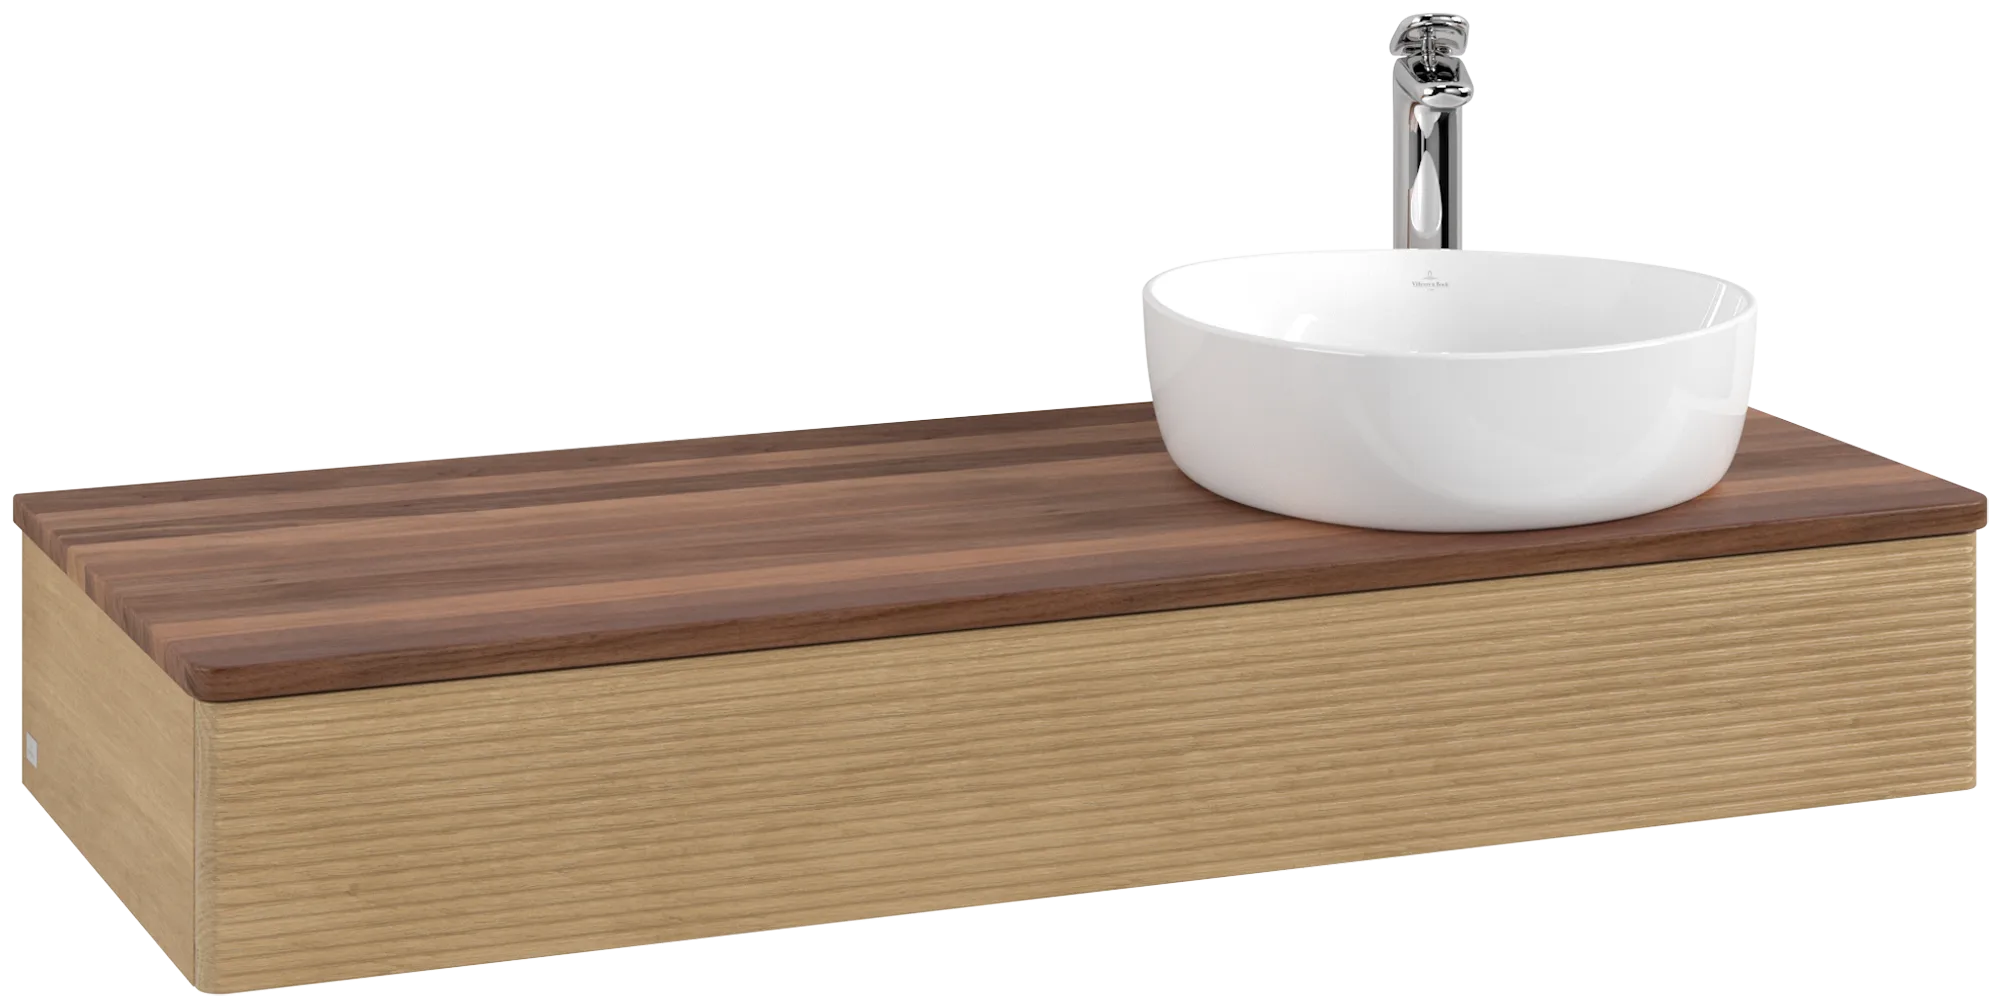 Picture of VILLEROY BOCH Antao Vanity unit, 1 pull-out compartment, 1200 x 190 x 500 mm, Front with grain texture, Honey Oak / Warm Walnut #K12152HN